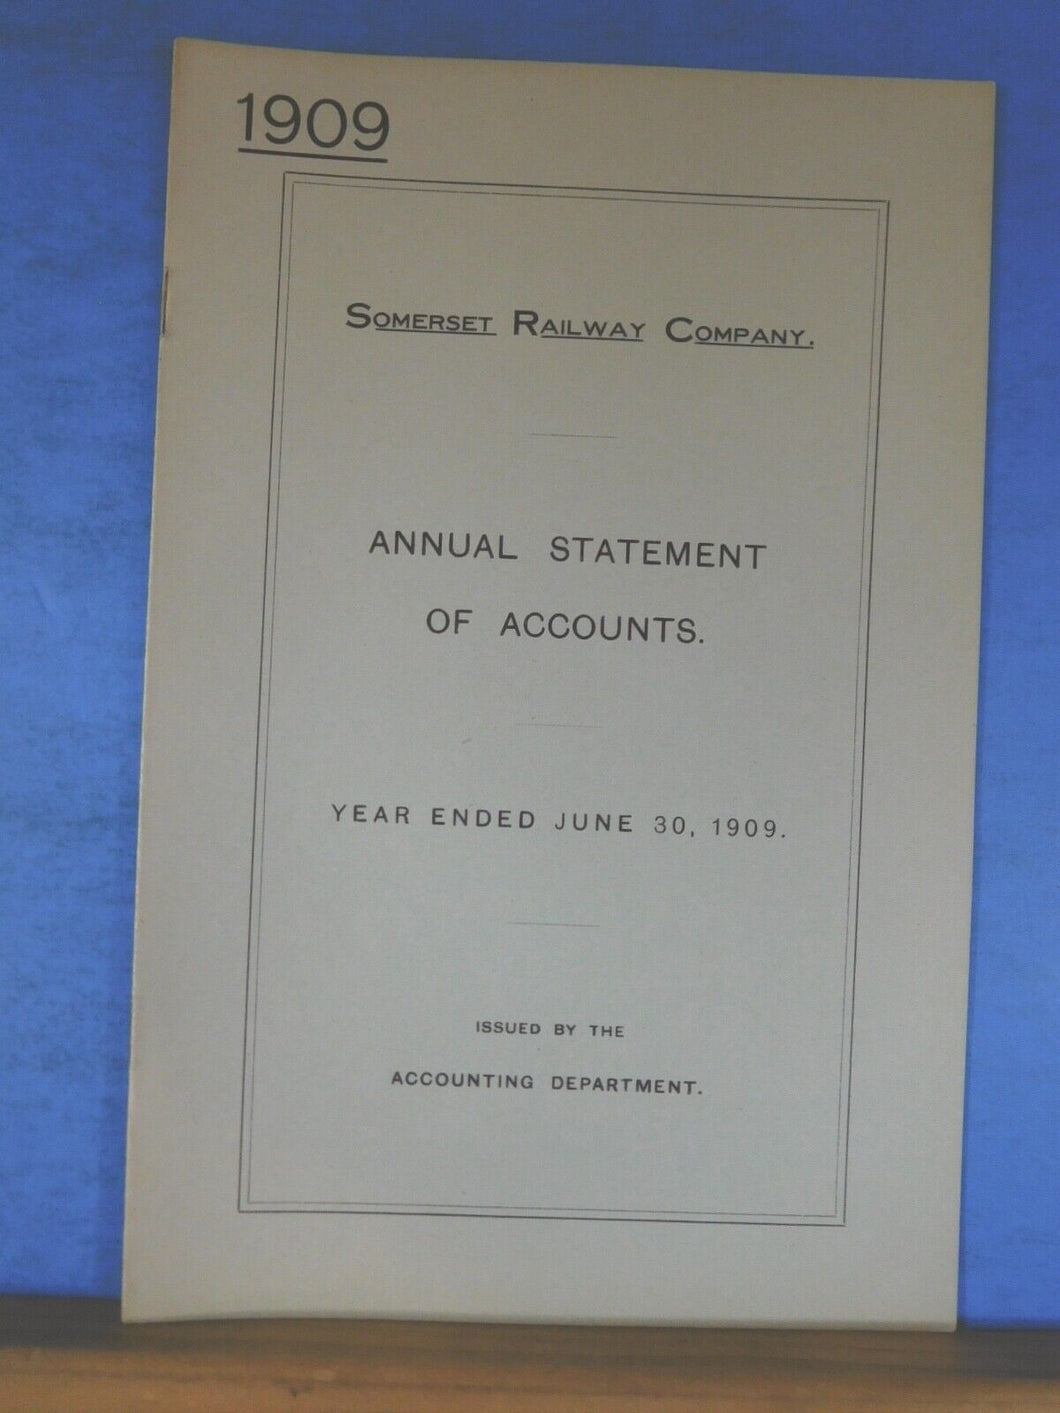 Somerset Railway Annual Report for the year ended June 30, 1909.  6 pages.